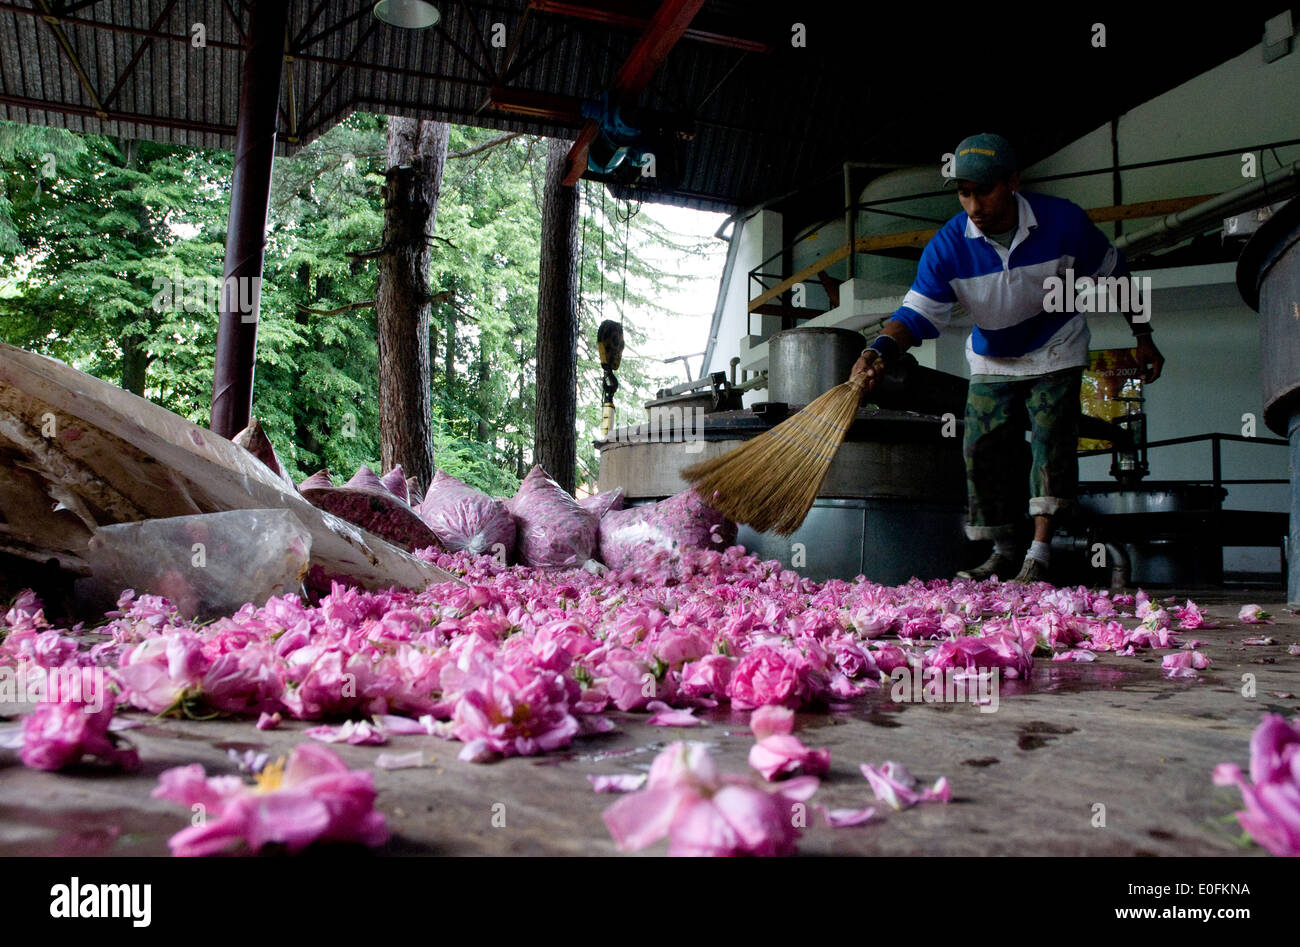 Worker at the Enio Bonchev Rose Distillery in Tarnichane, Bulgaria, scoops up the morning's rose harvest. Stock Photo